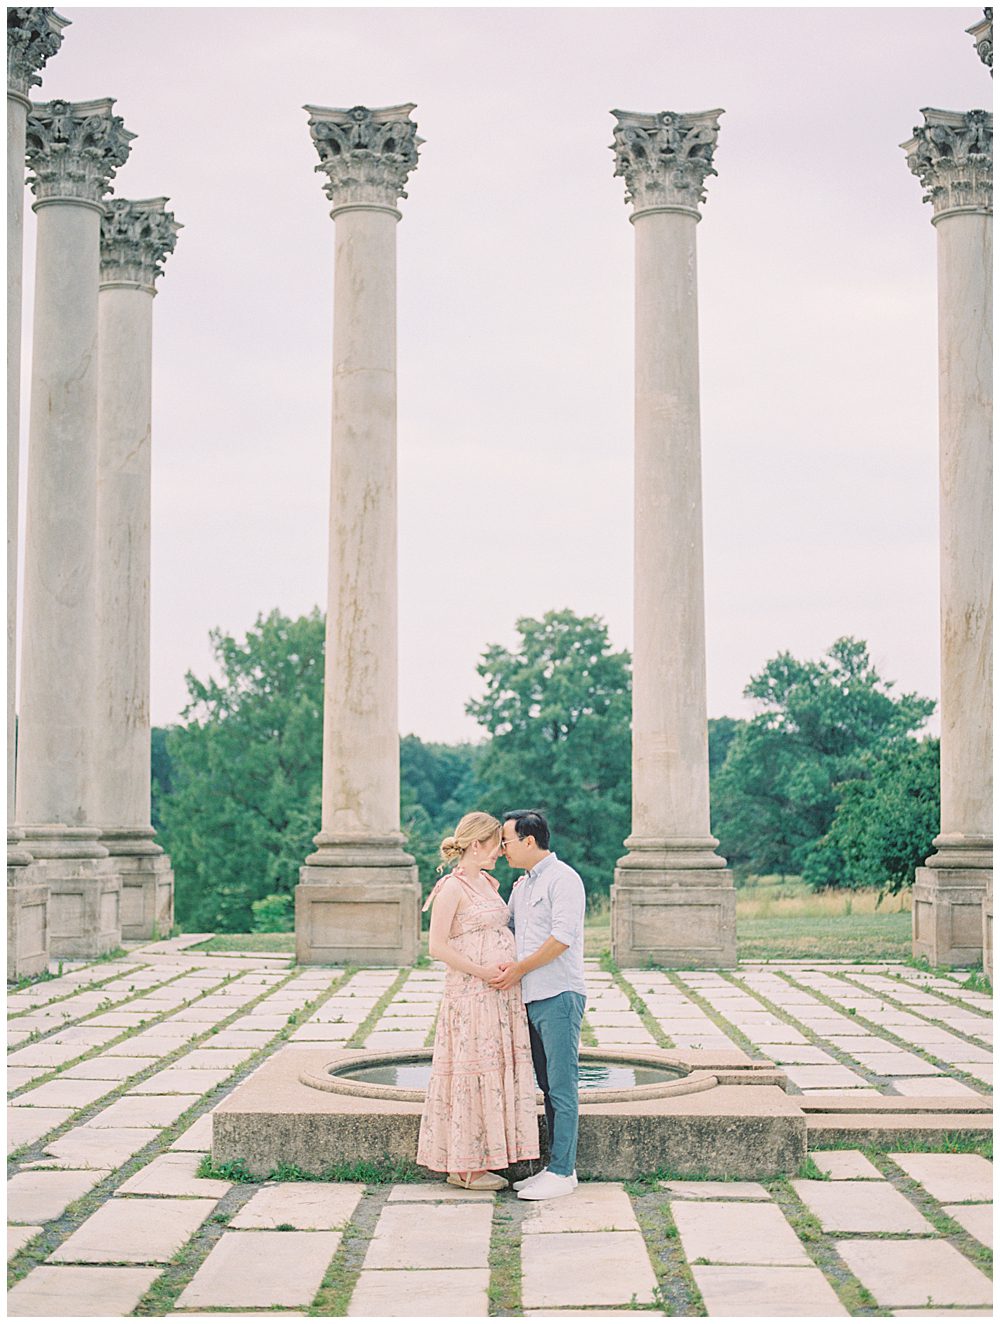 Expecting parents stand in the center of the National Arboretum columns, facing one another during their maternity session.